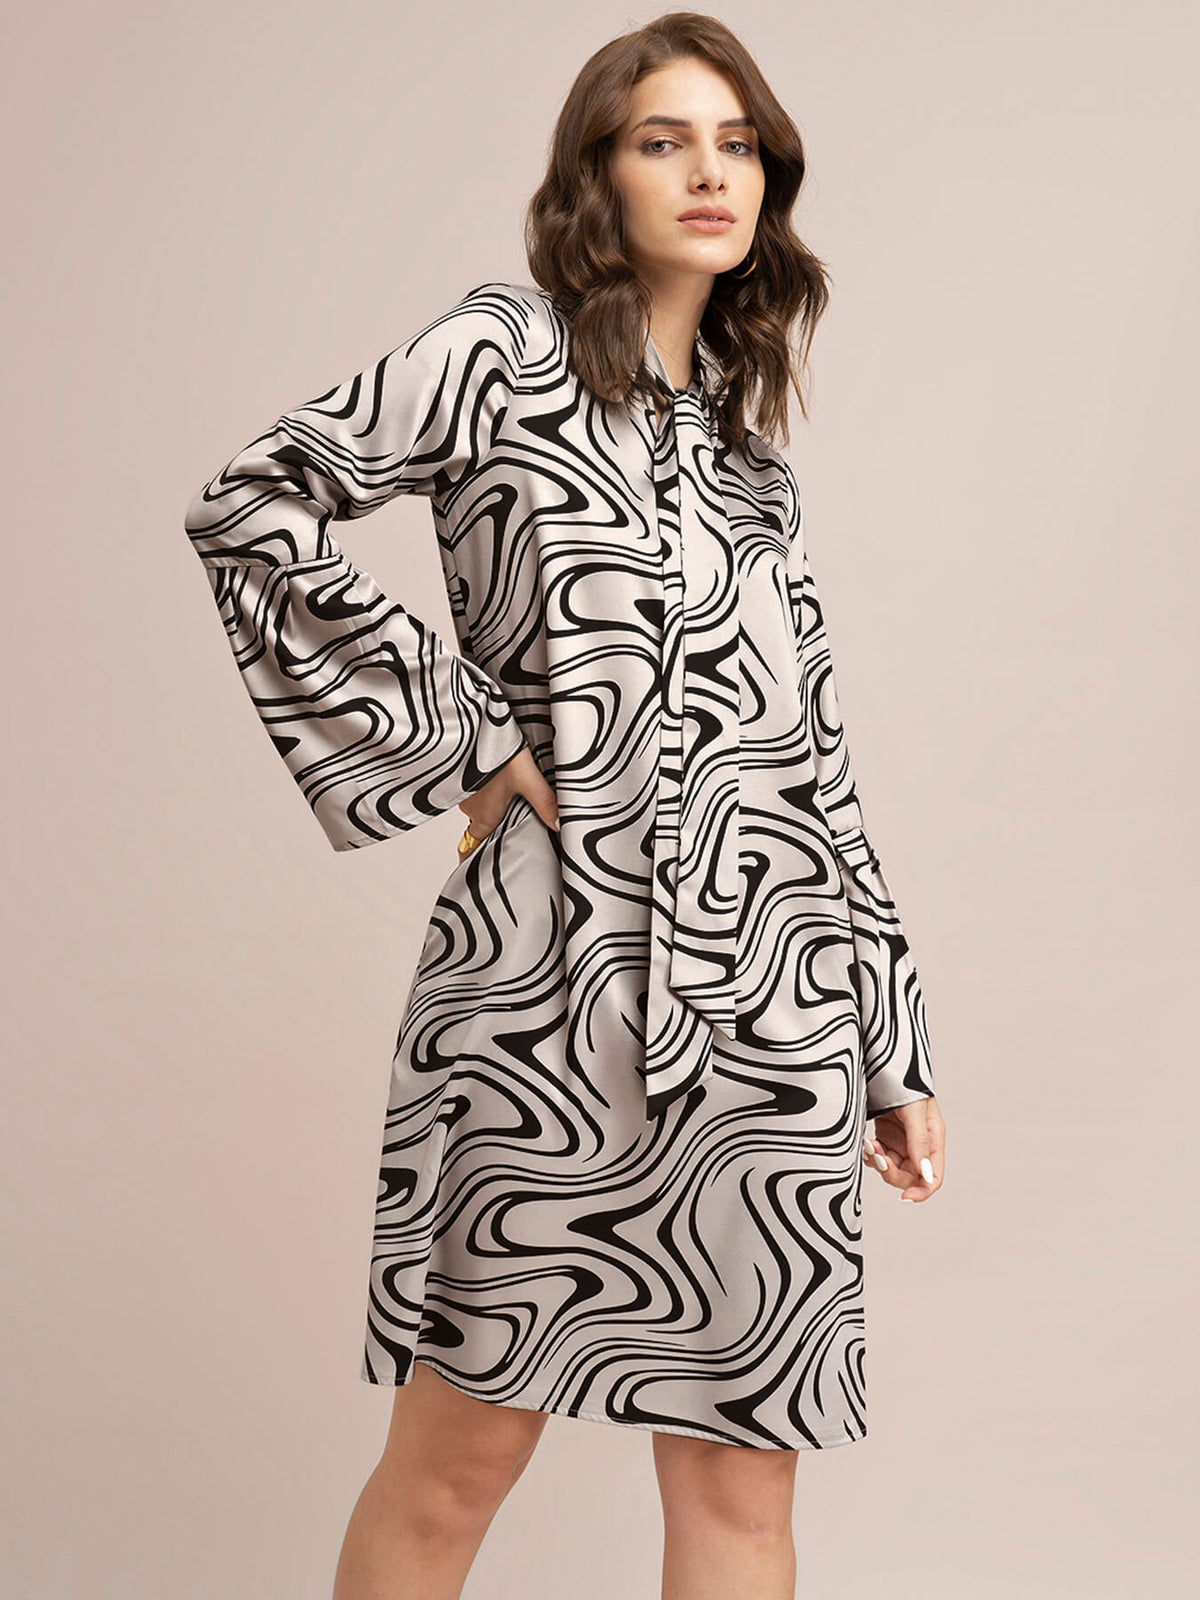 Satin Abstract Print Shift Dress - Beige And Black